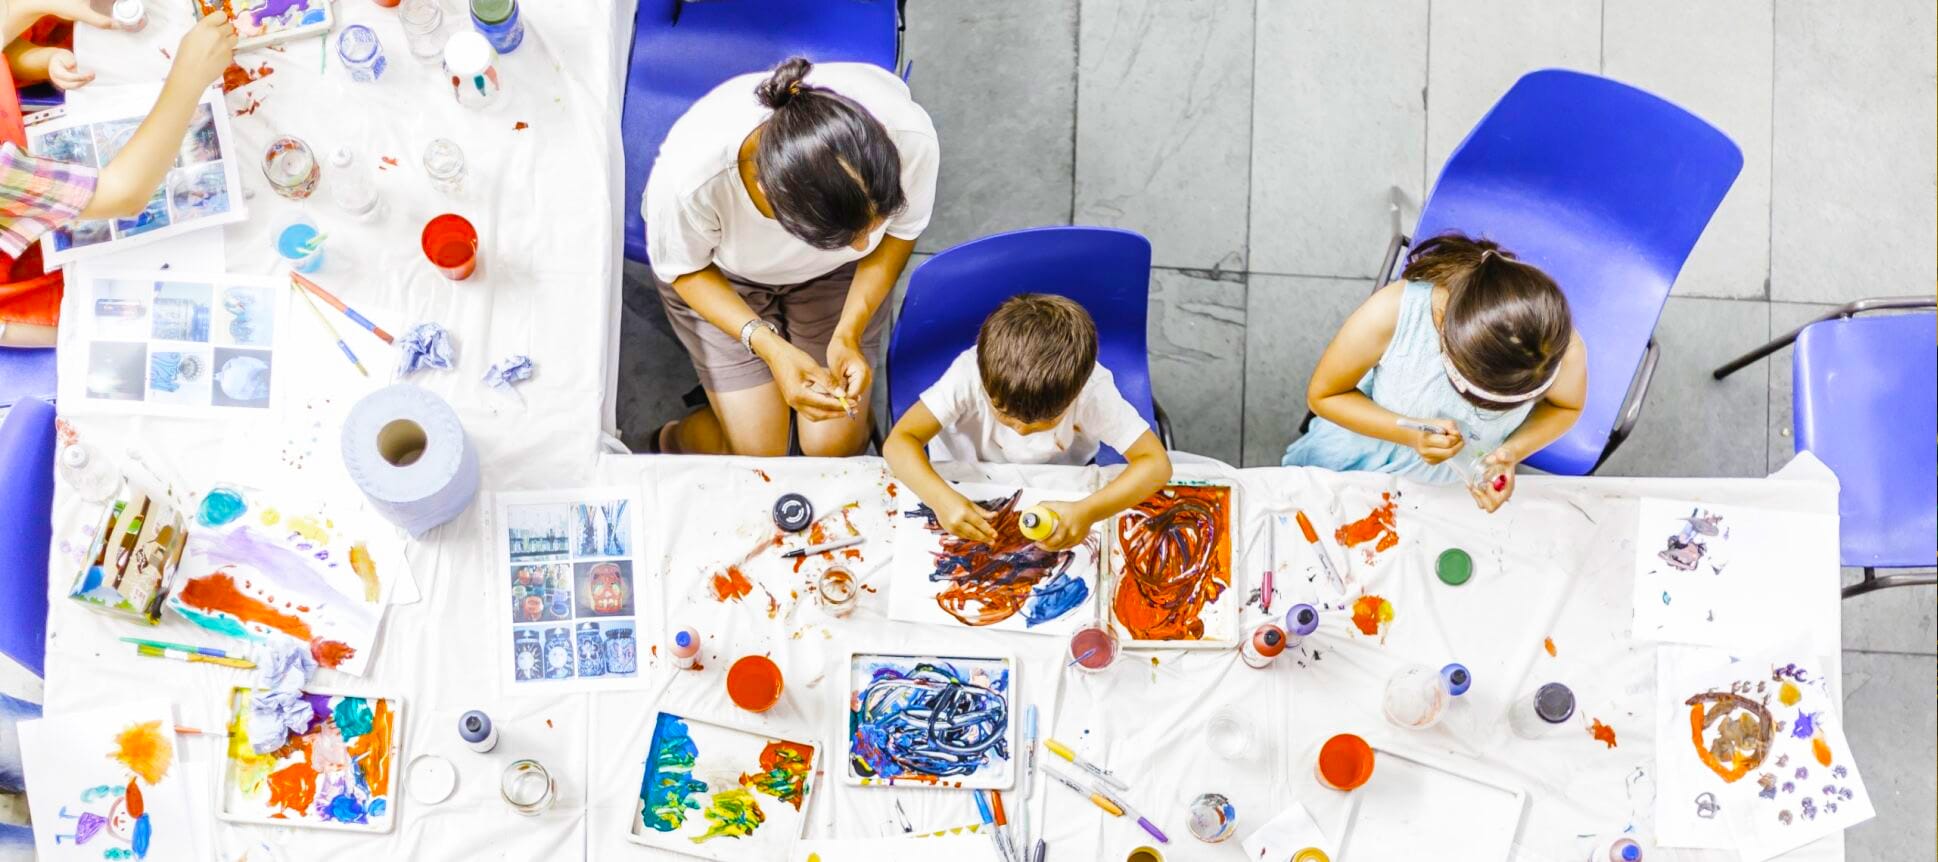 A long, busy table full of messy finger painting, colourful paints and art supplies. An adult participates in the art with two children.